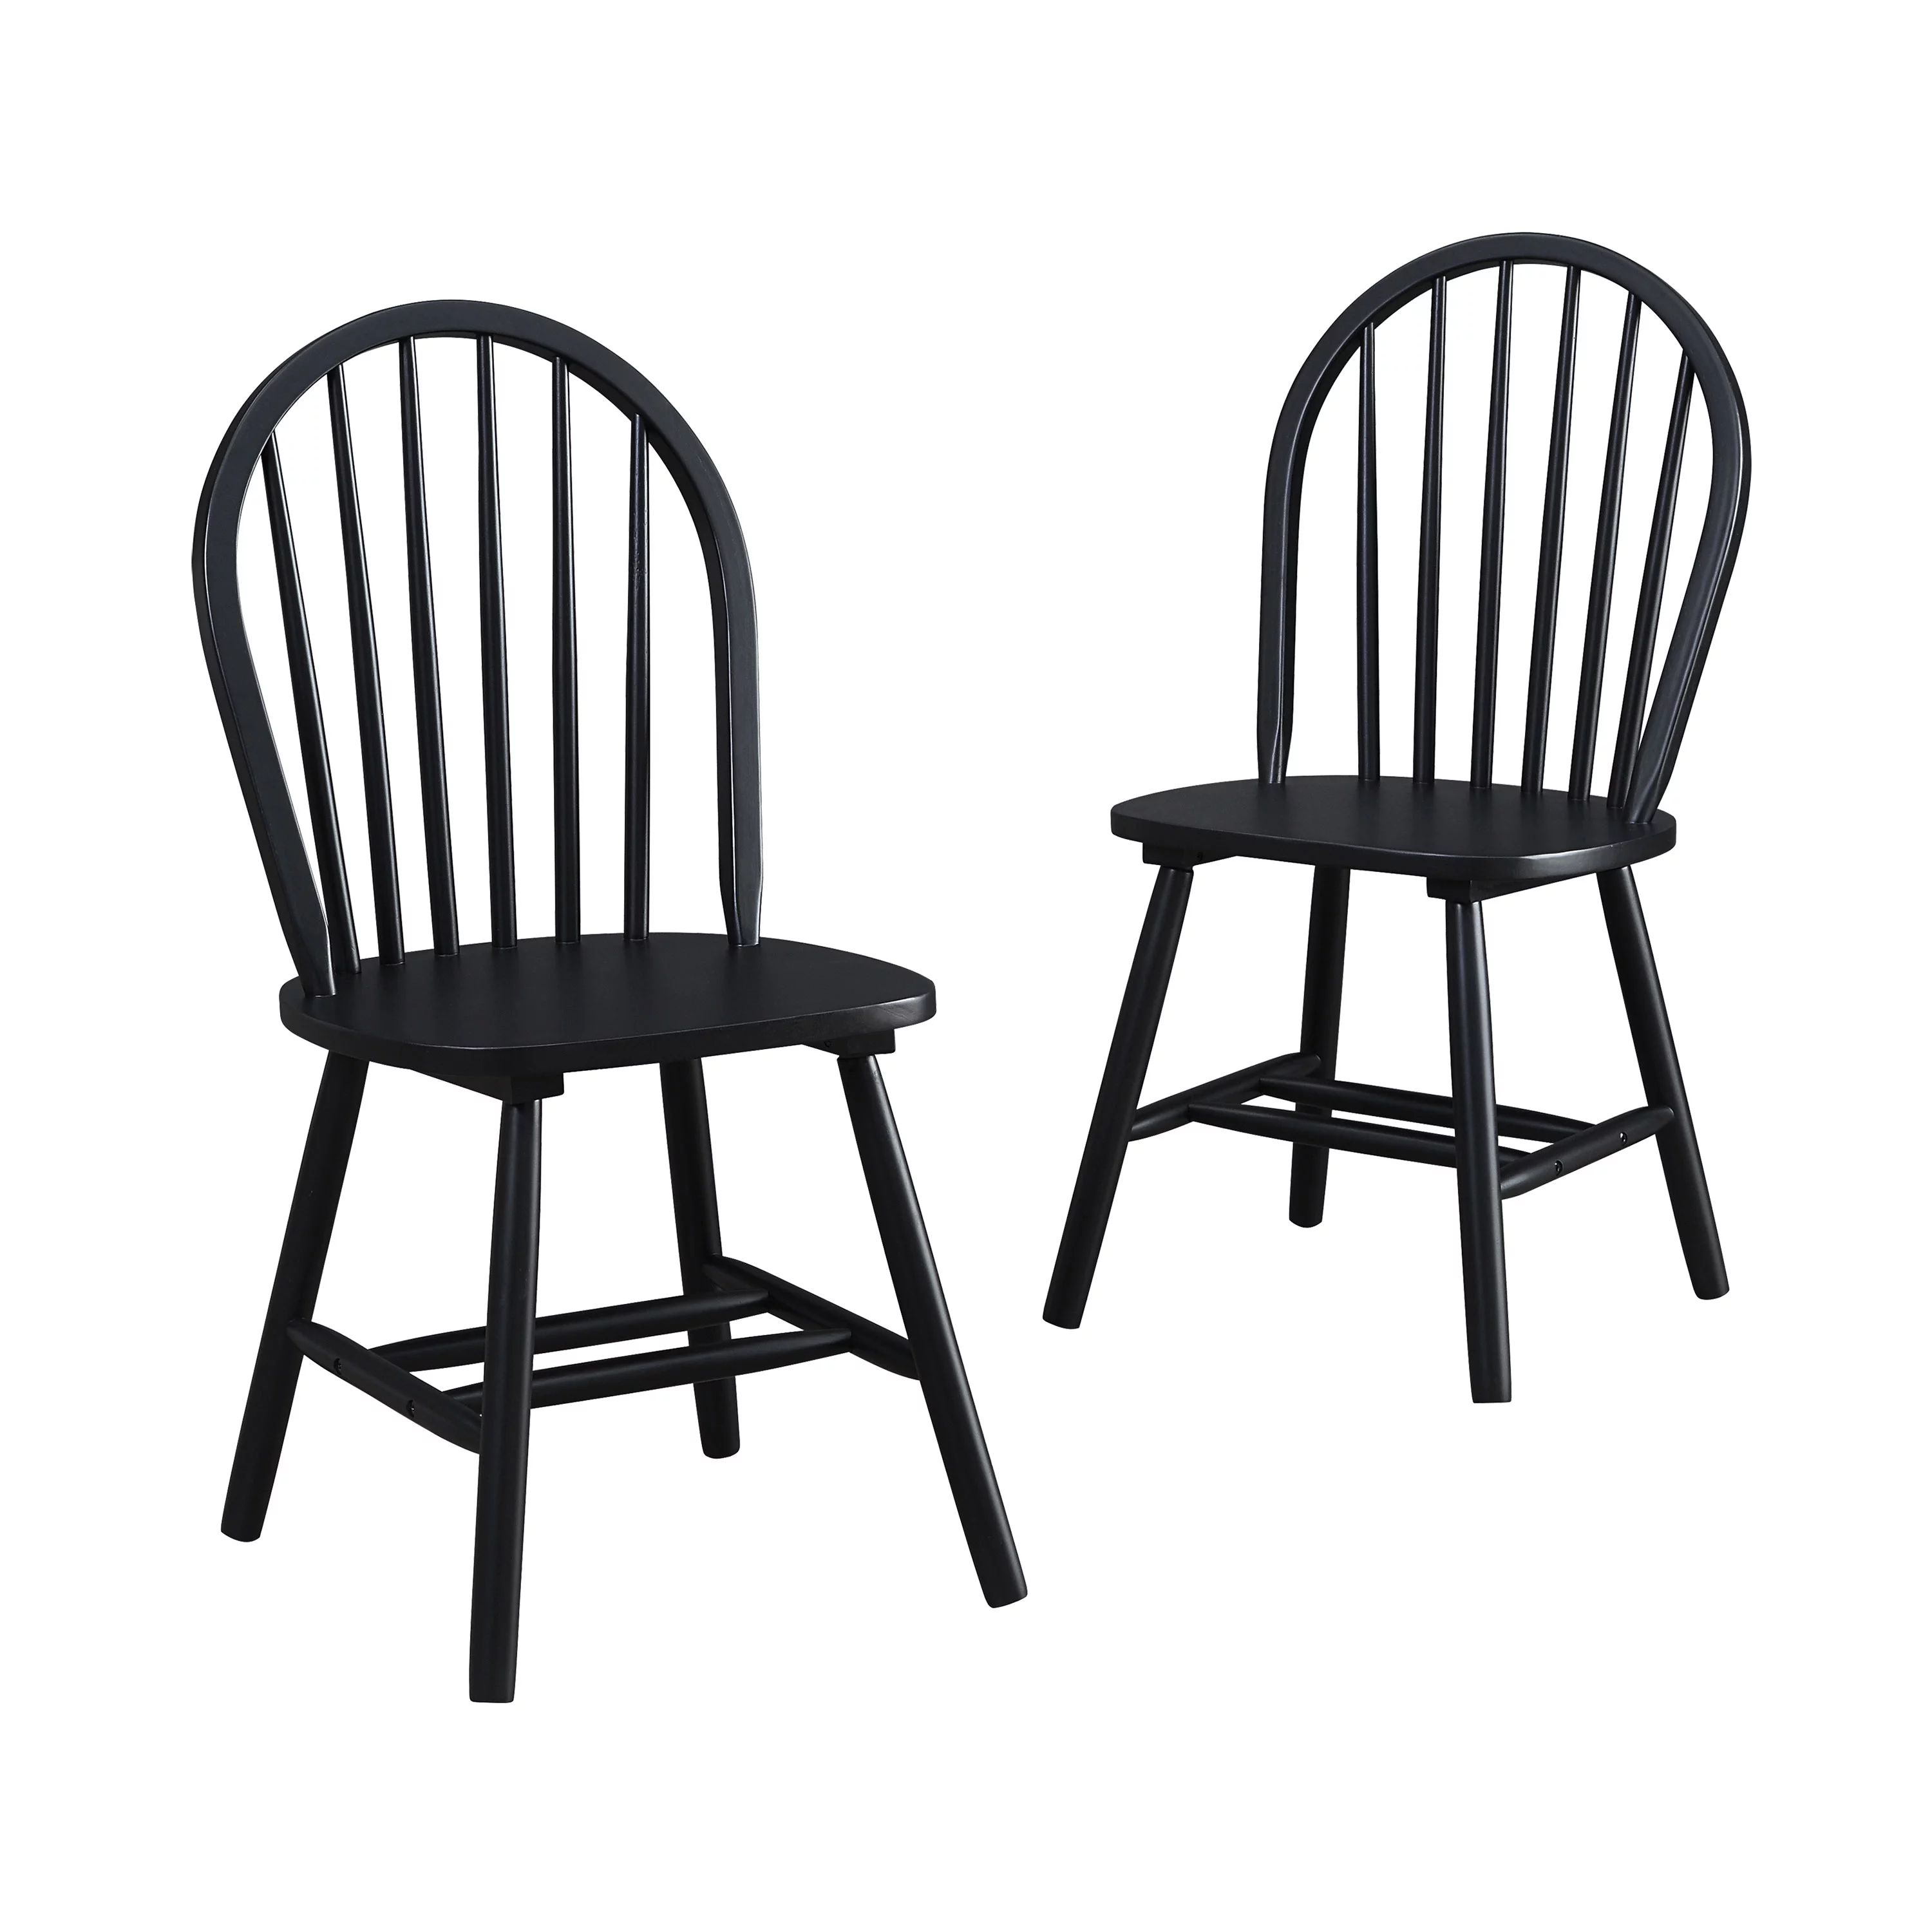 Better Homes and Gardens Autumn Lane Windsor Solid Wood Dining Chairs, Set of 2, Black Finish | Walmart (US)